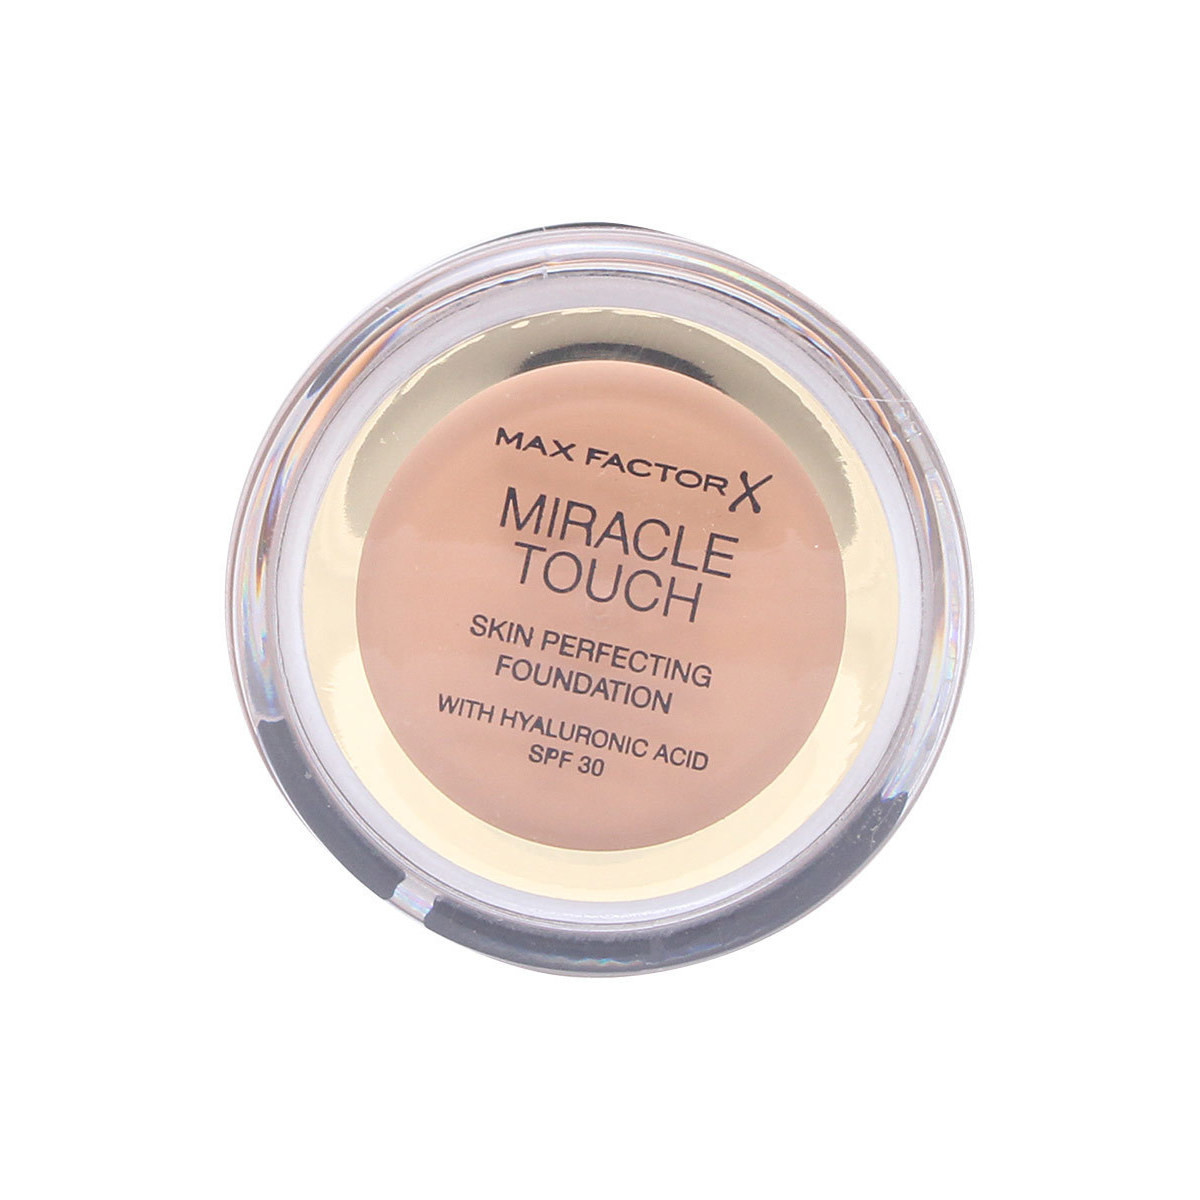 Beauty Make-up & Foundation  Max Factor Miracle Touch Liquid Illusion Foundation 085-caramel 